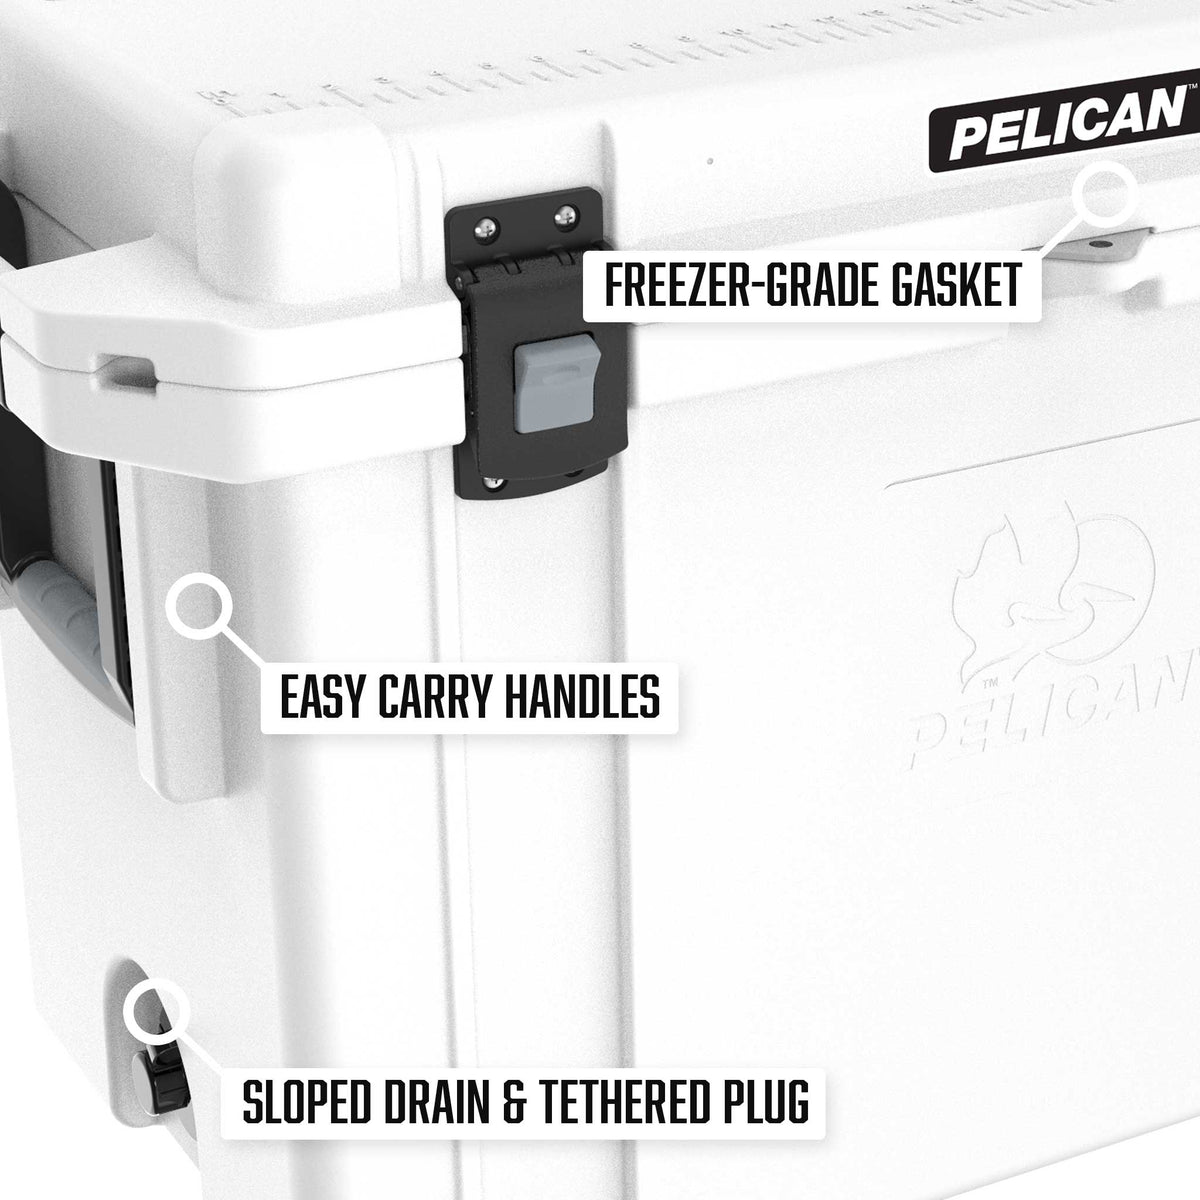 95QT Pelican Elite Cooler comes with two sets of easy carry handles, a freezer grade gasket, and a sloped drain &amp; tethered plug